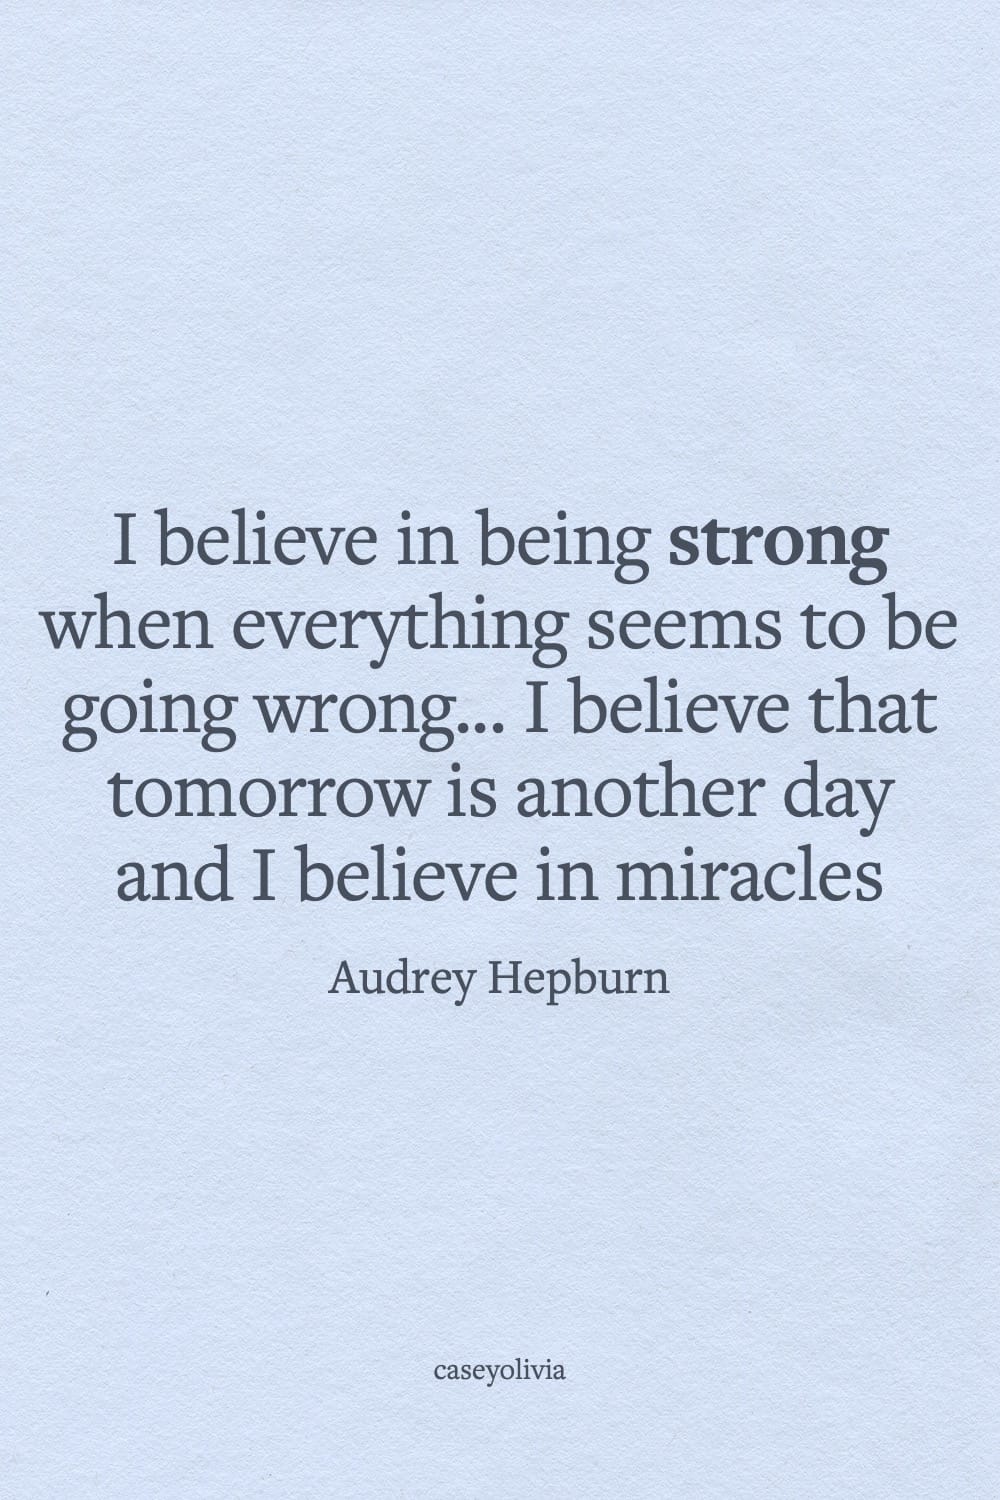 strength and miracles inspirational quote audrey hepburn